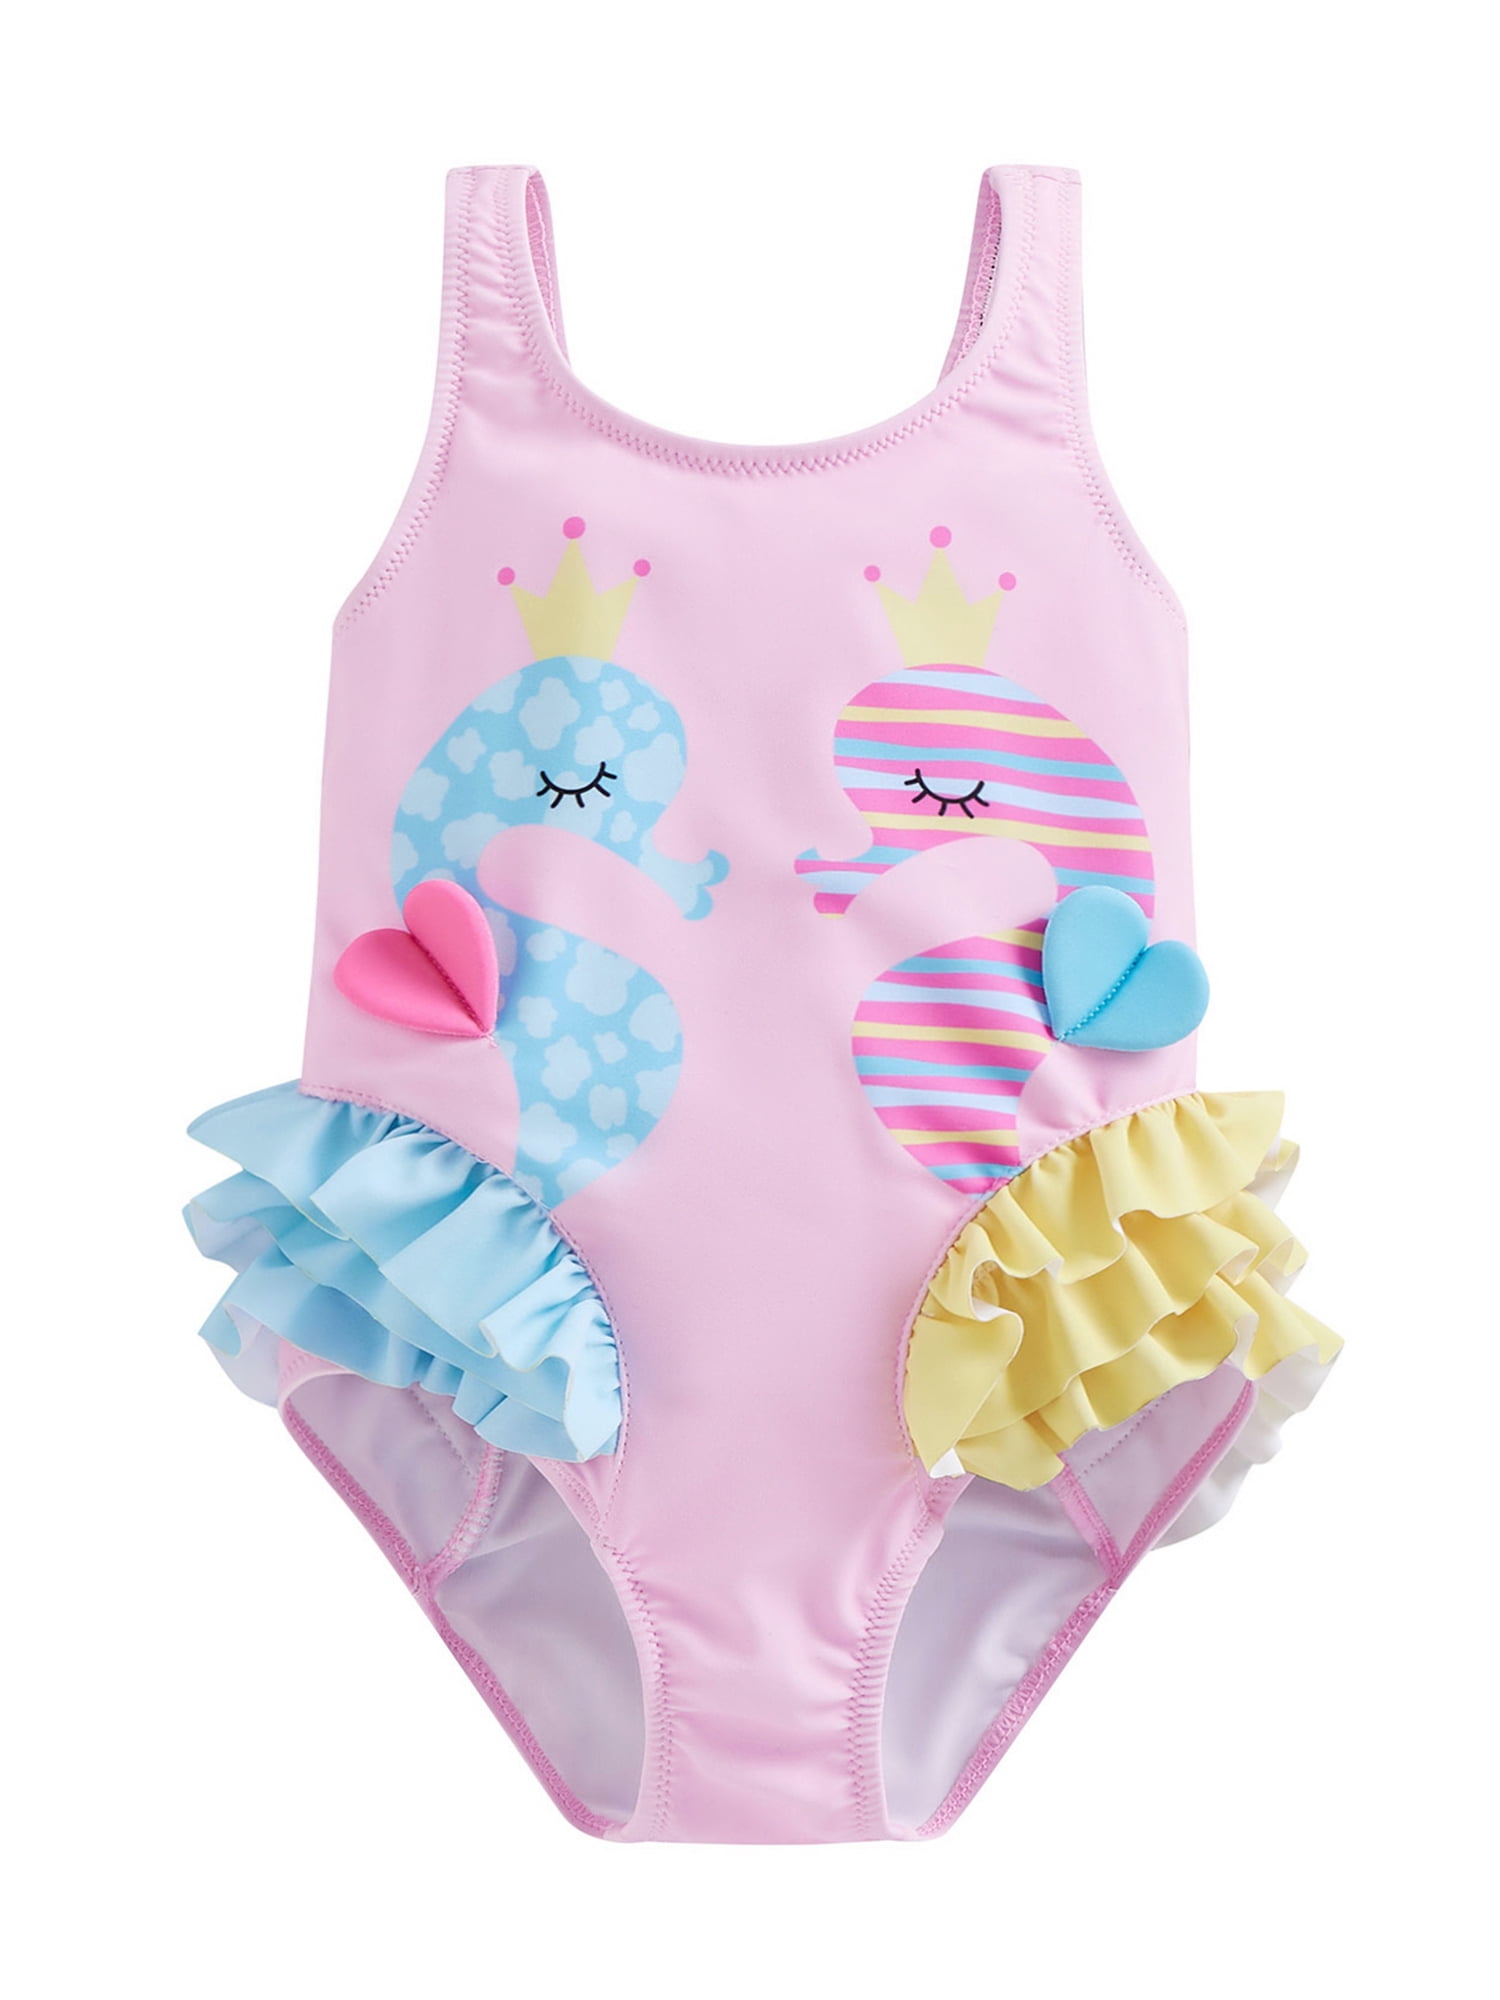 aturustex Toddler Baby Girl One Piece Swimsuit 18M 24M 3T 4T 5T 6T ...